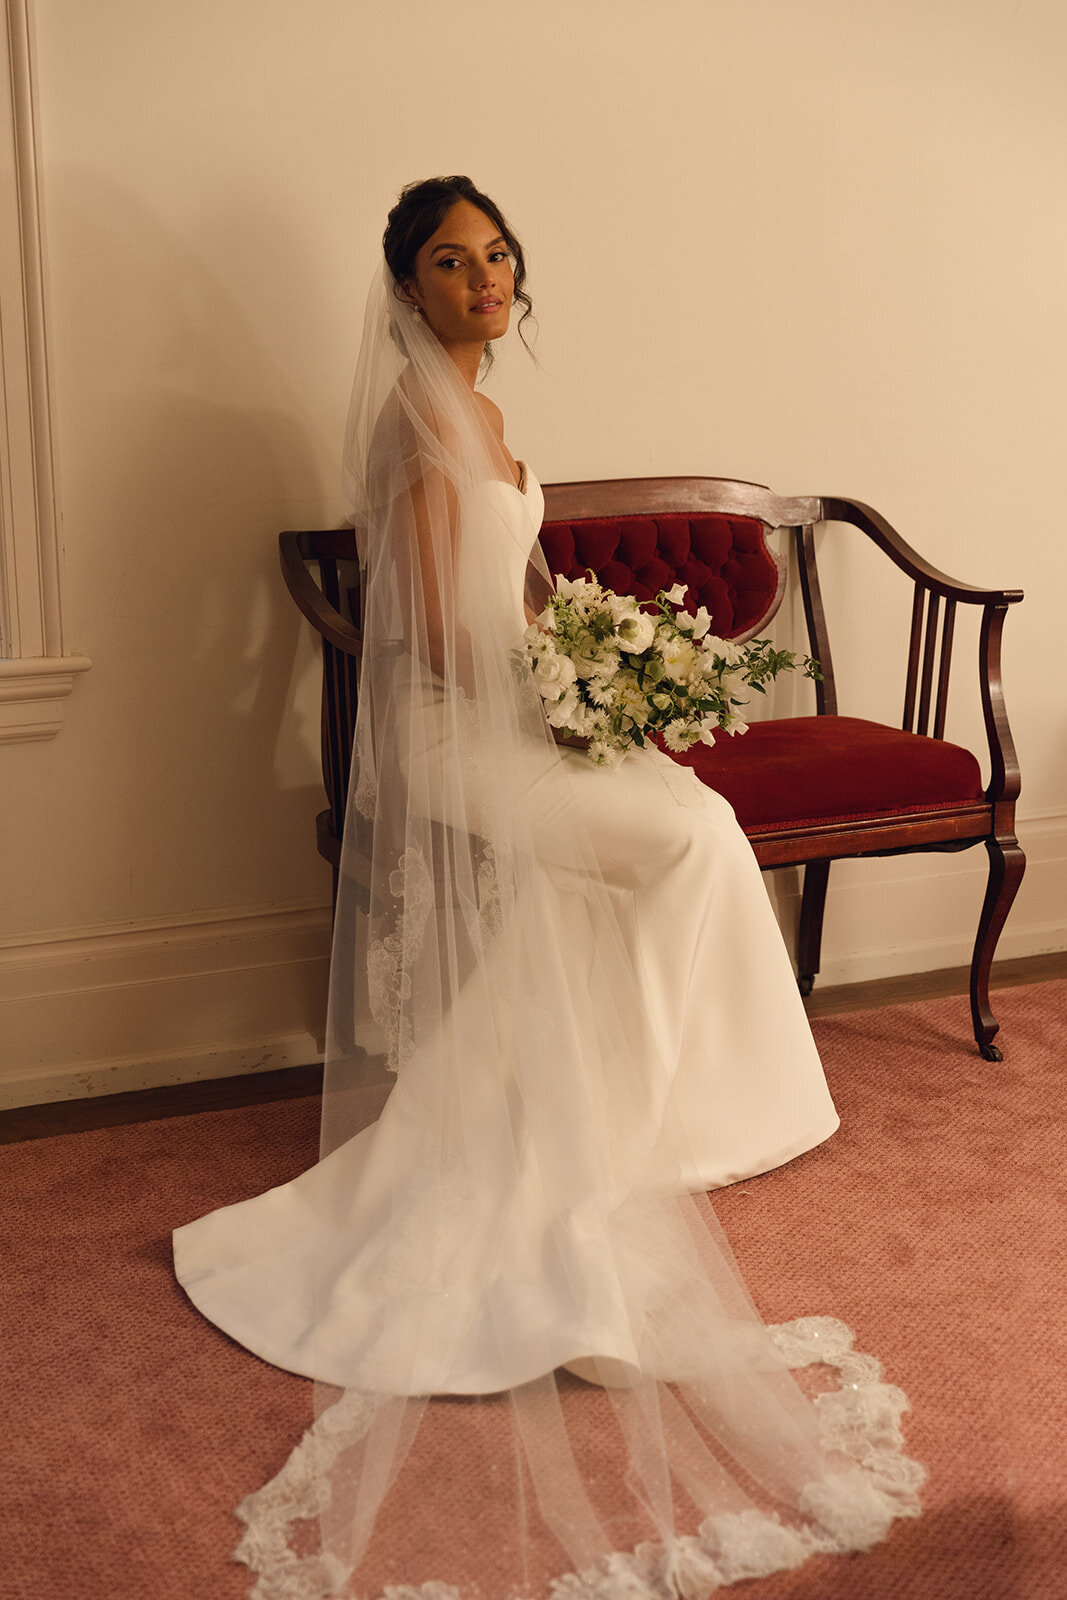 Bride posing in a wedding dress holding a bouquet